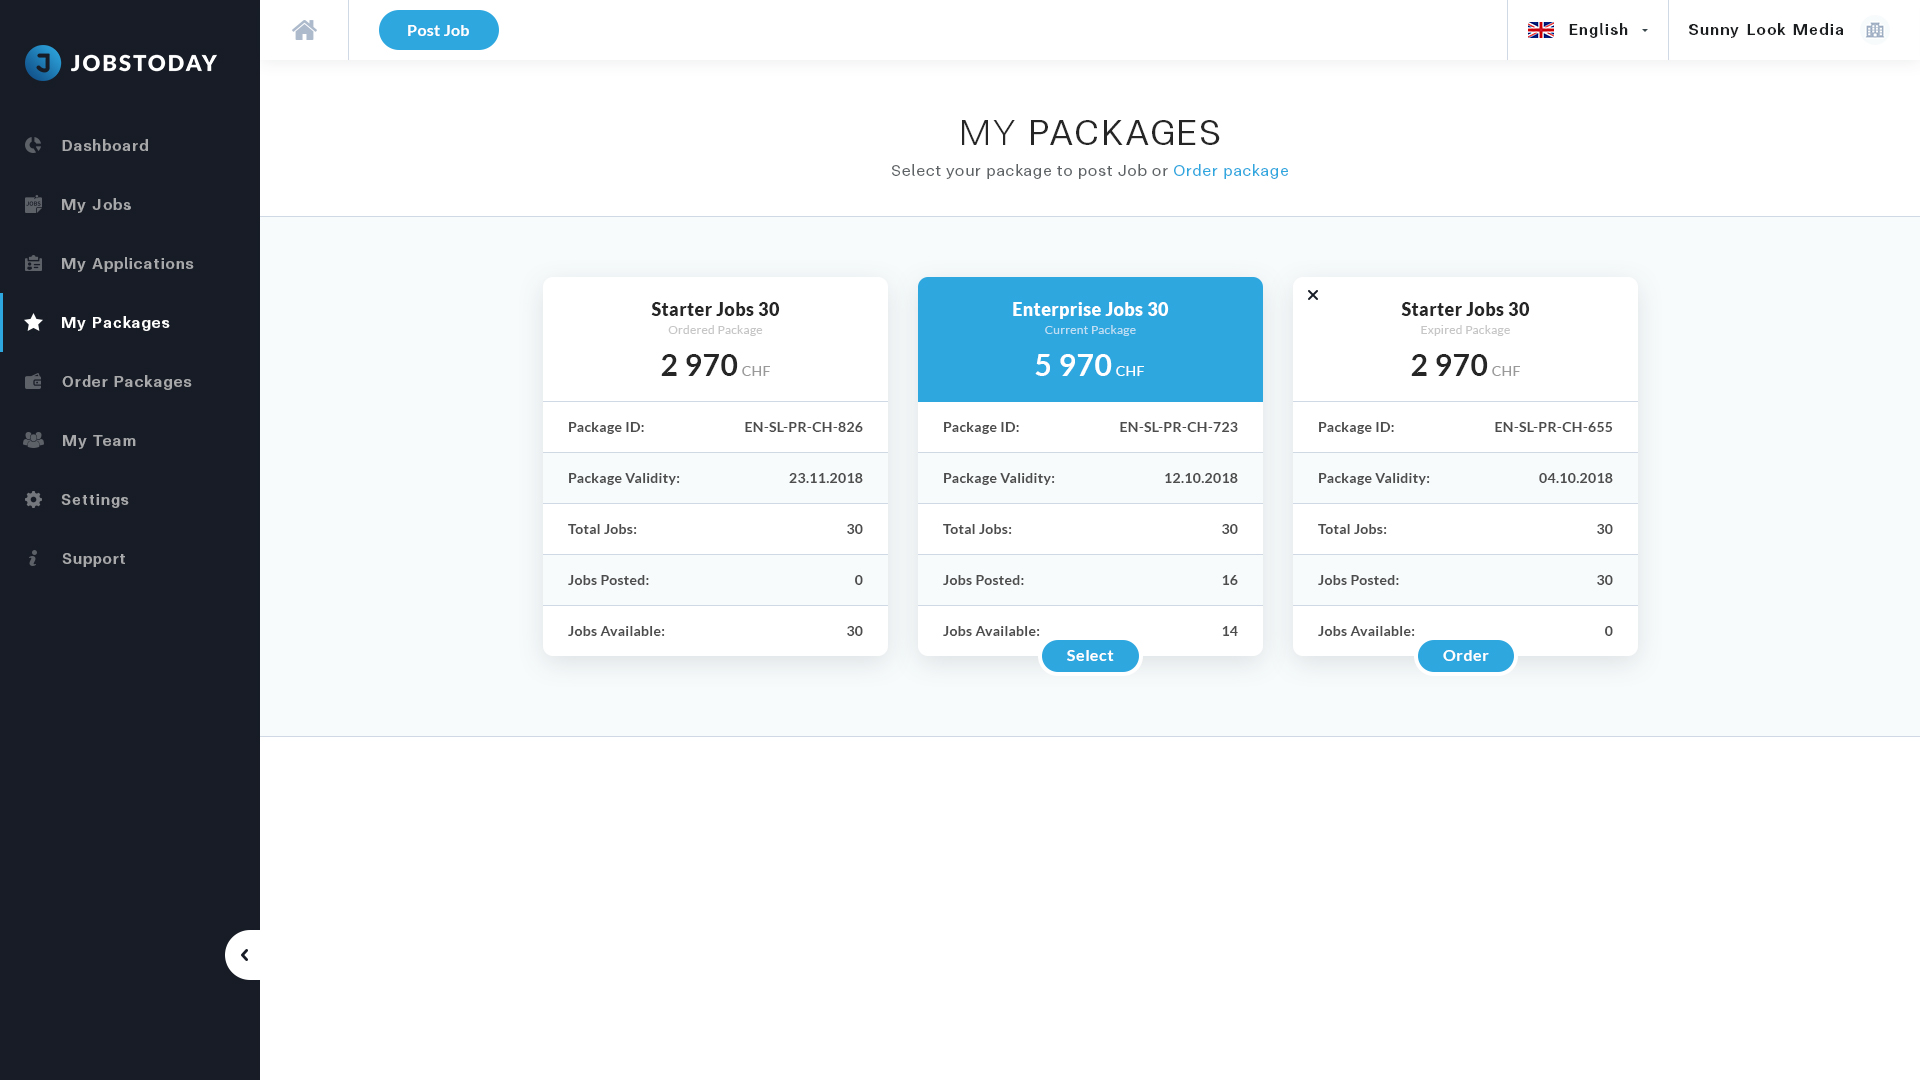 Screenshot: My Packages